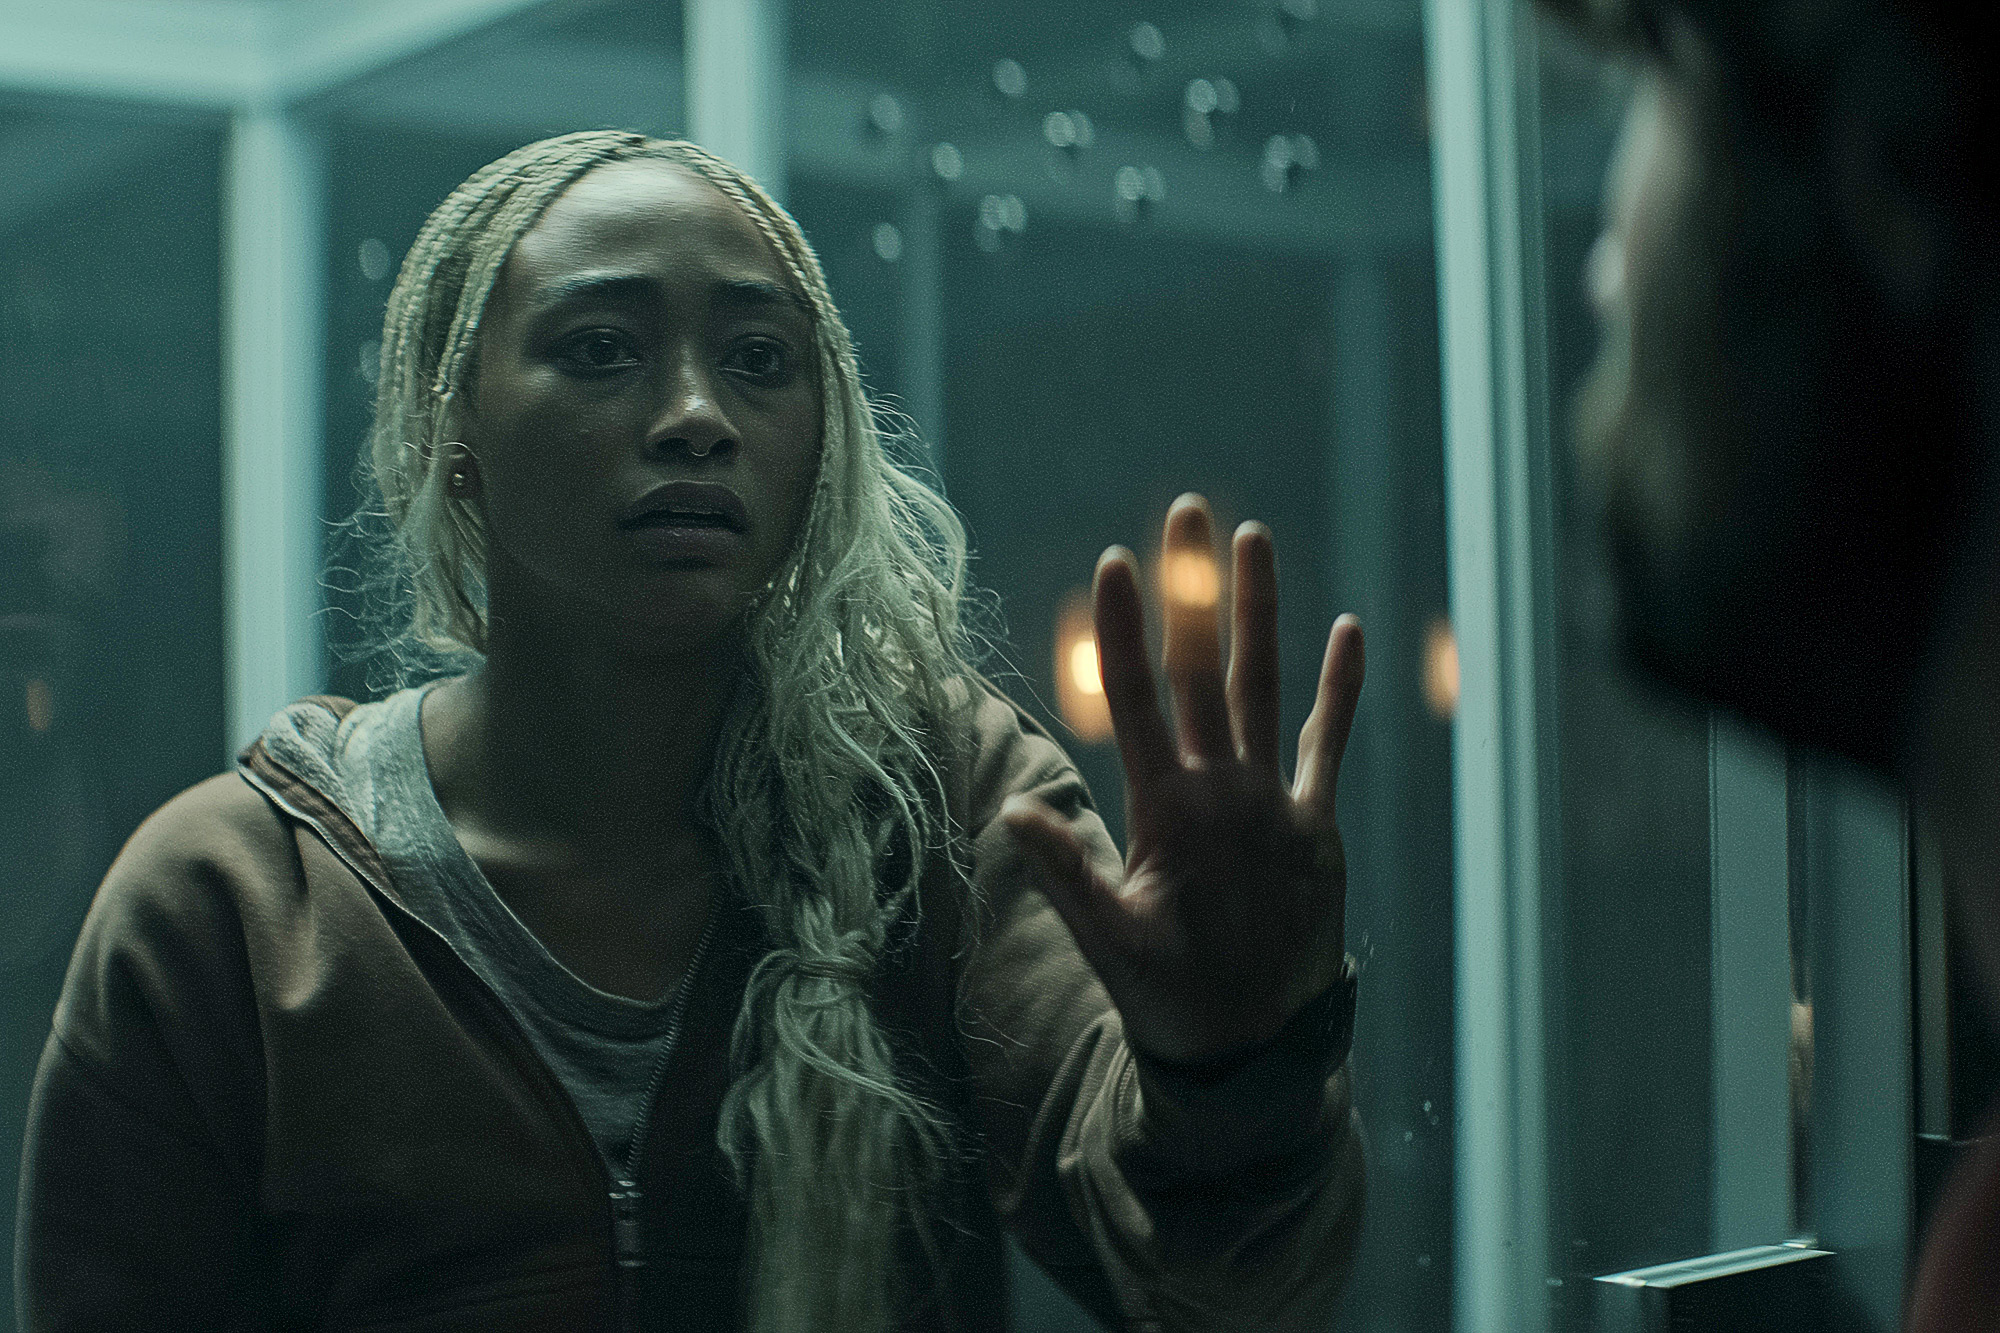 The series and films of Tati Gabrielle